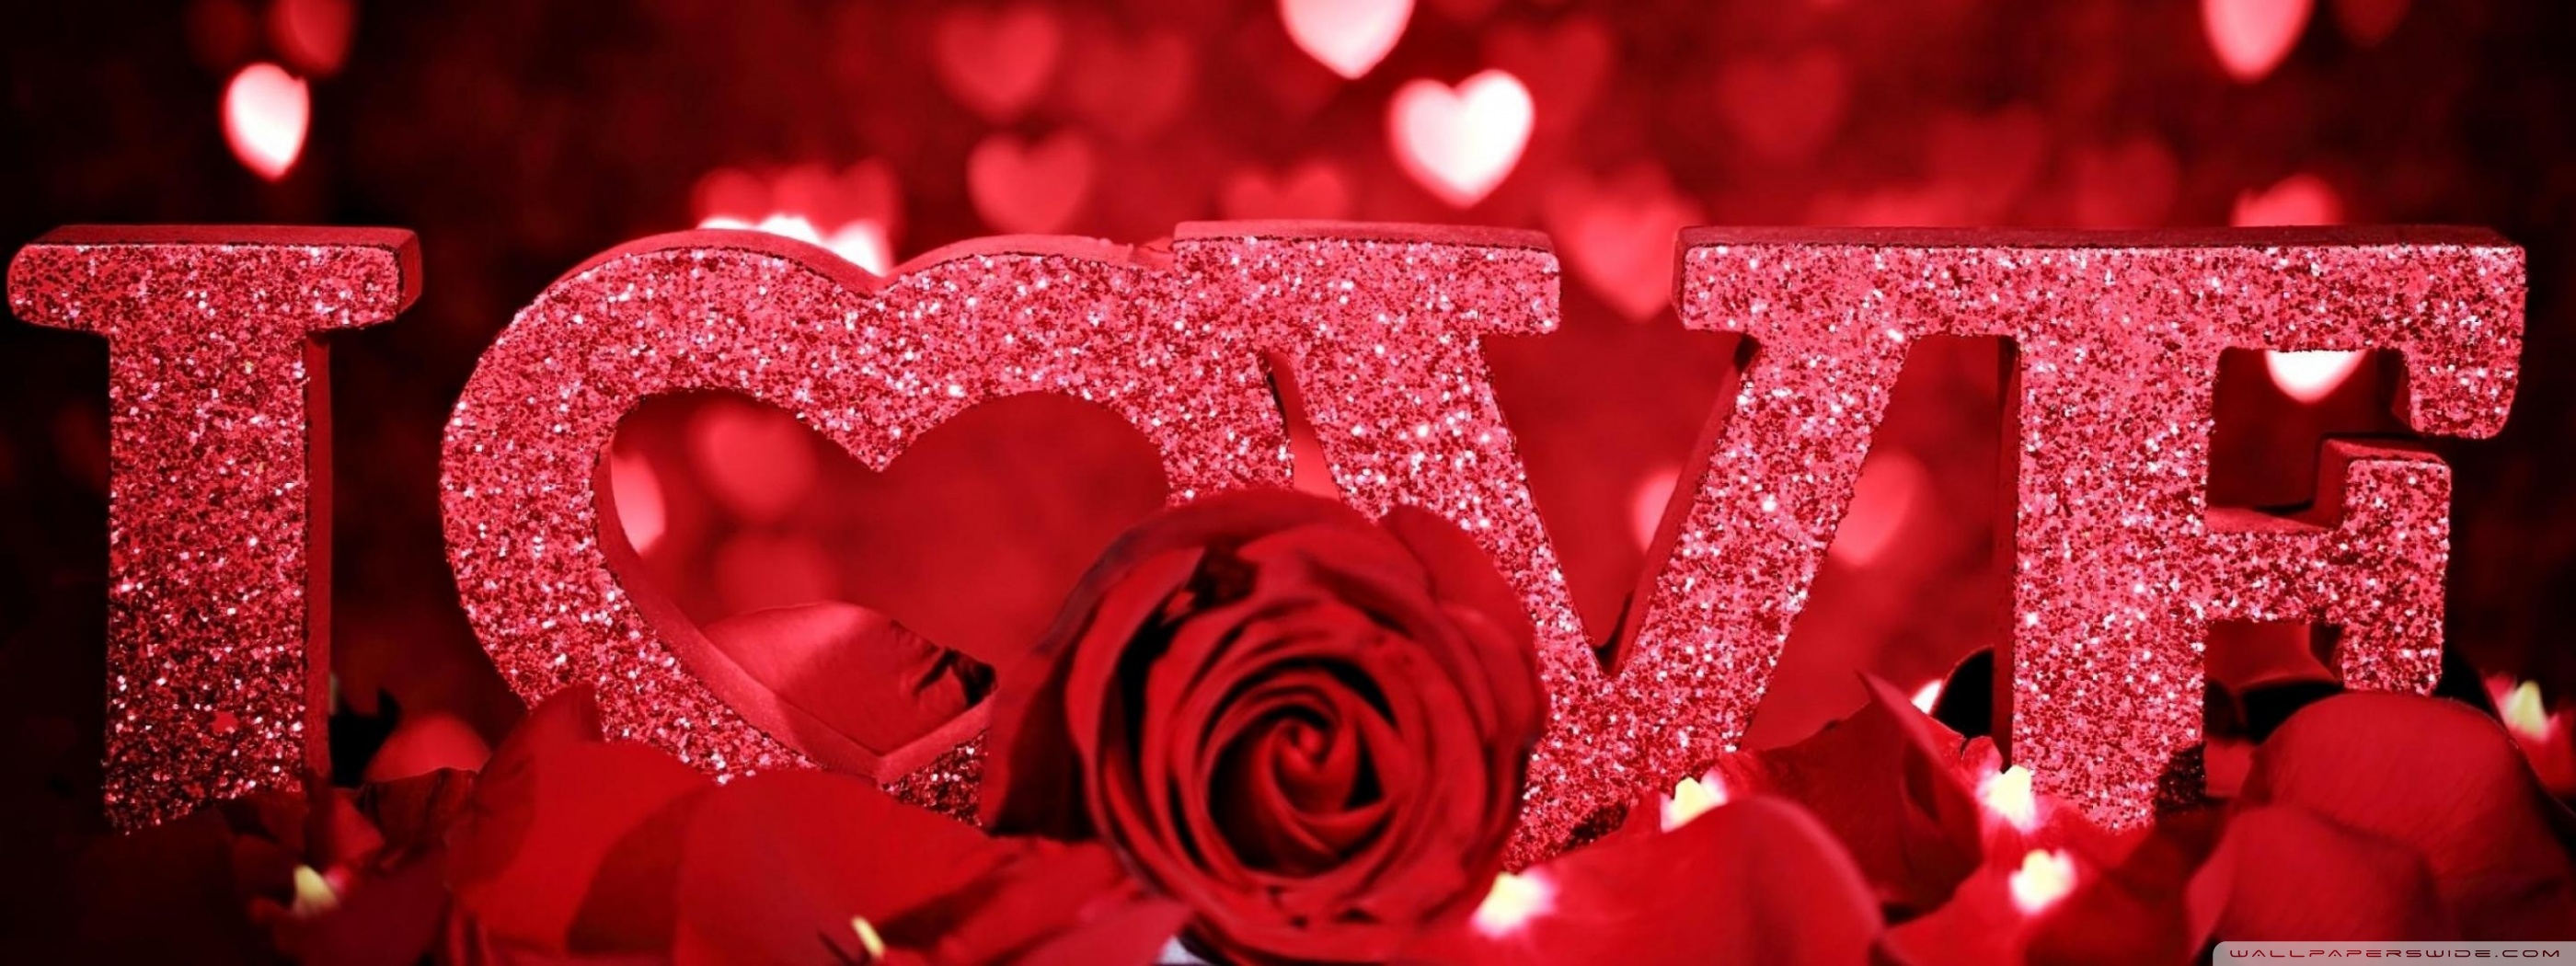 Dual Standard - Red Hearts And Roses , HD Wallpaper & Backgrounds